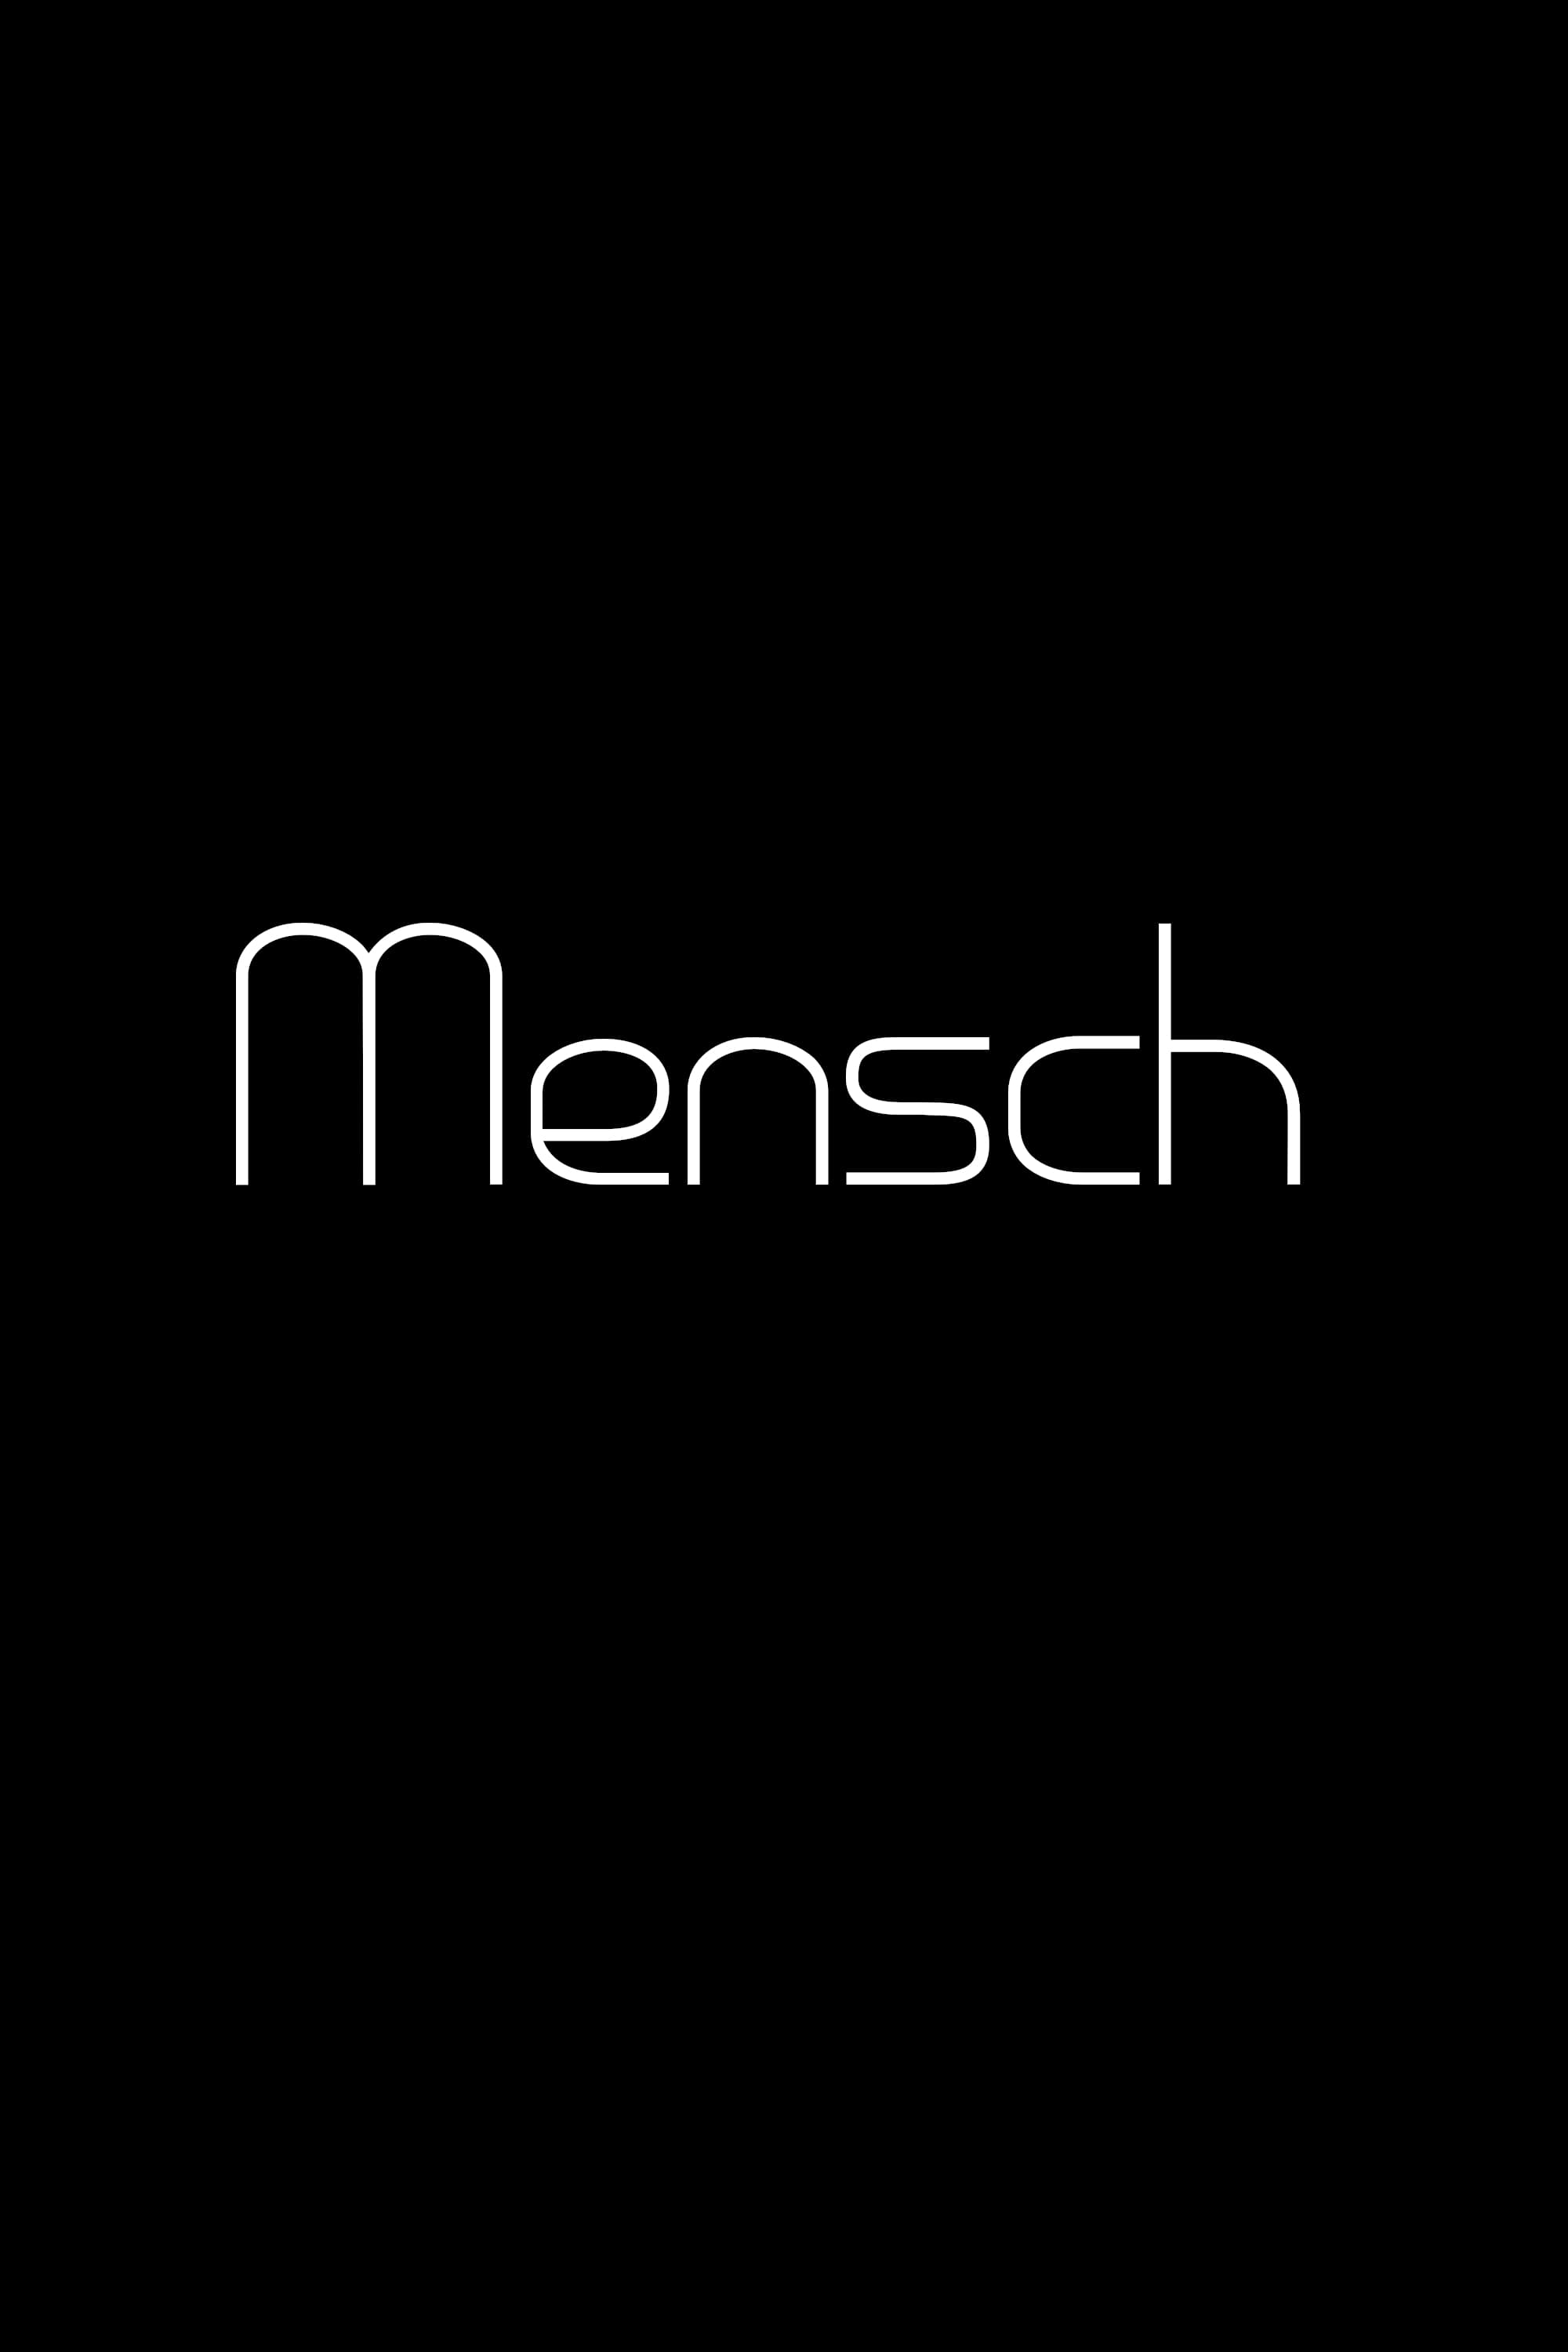 Mensch (not completed)